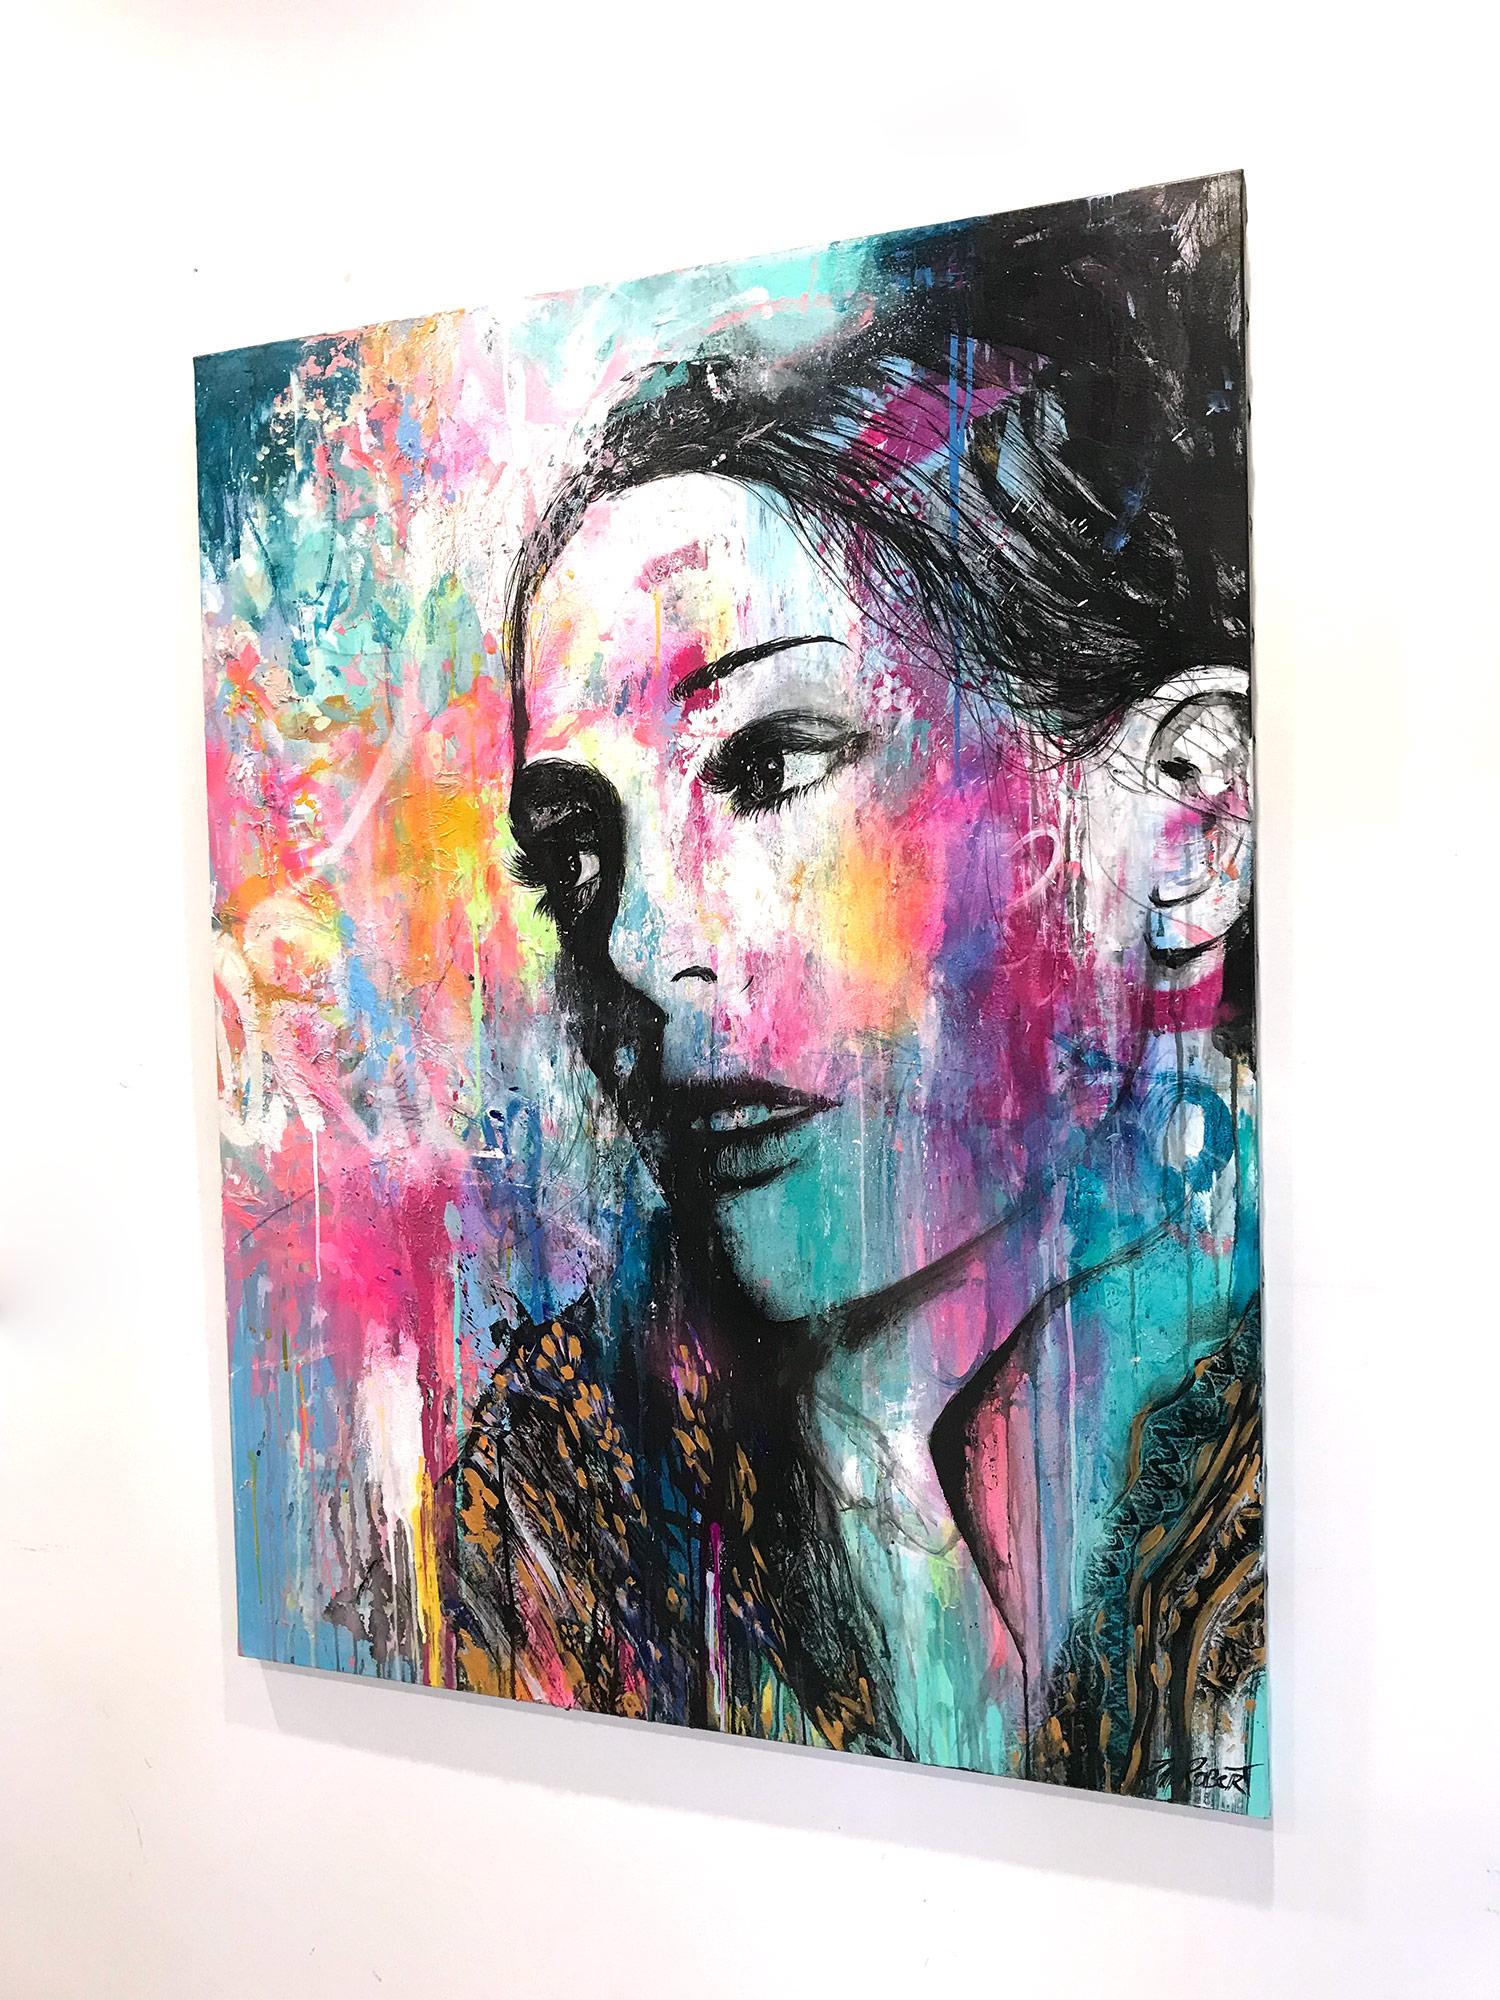 “Elle Prit son Courage” She Took her Courage, Colorful, Abstract Street Art For Sale 8